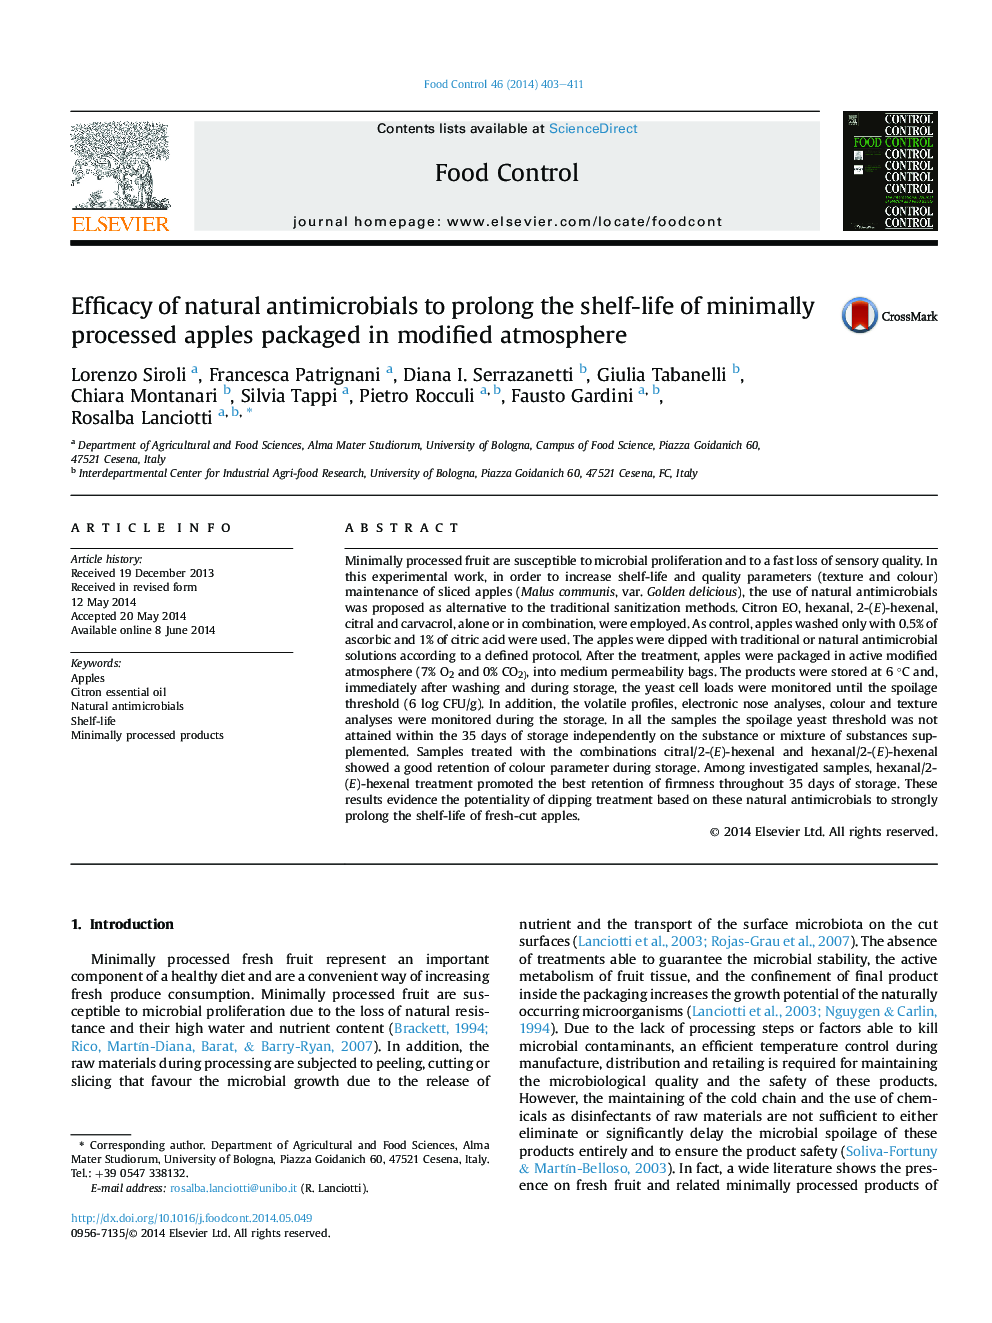 Efficacy of natural antimicrobials to prolong the shelf-life of minimally processed apples packaged in modified atmosphere